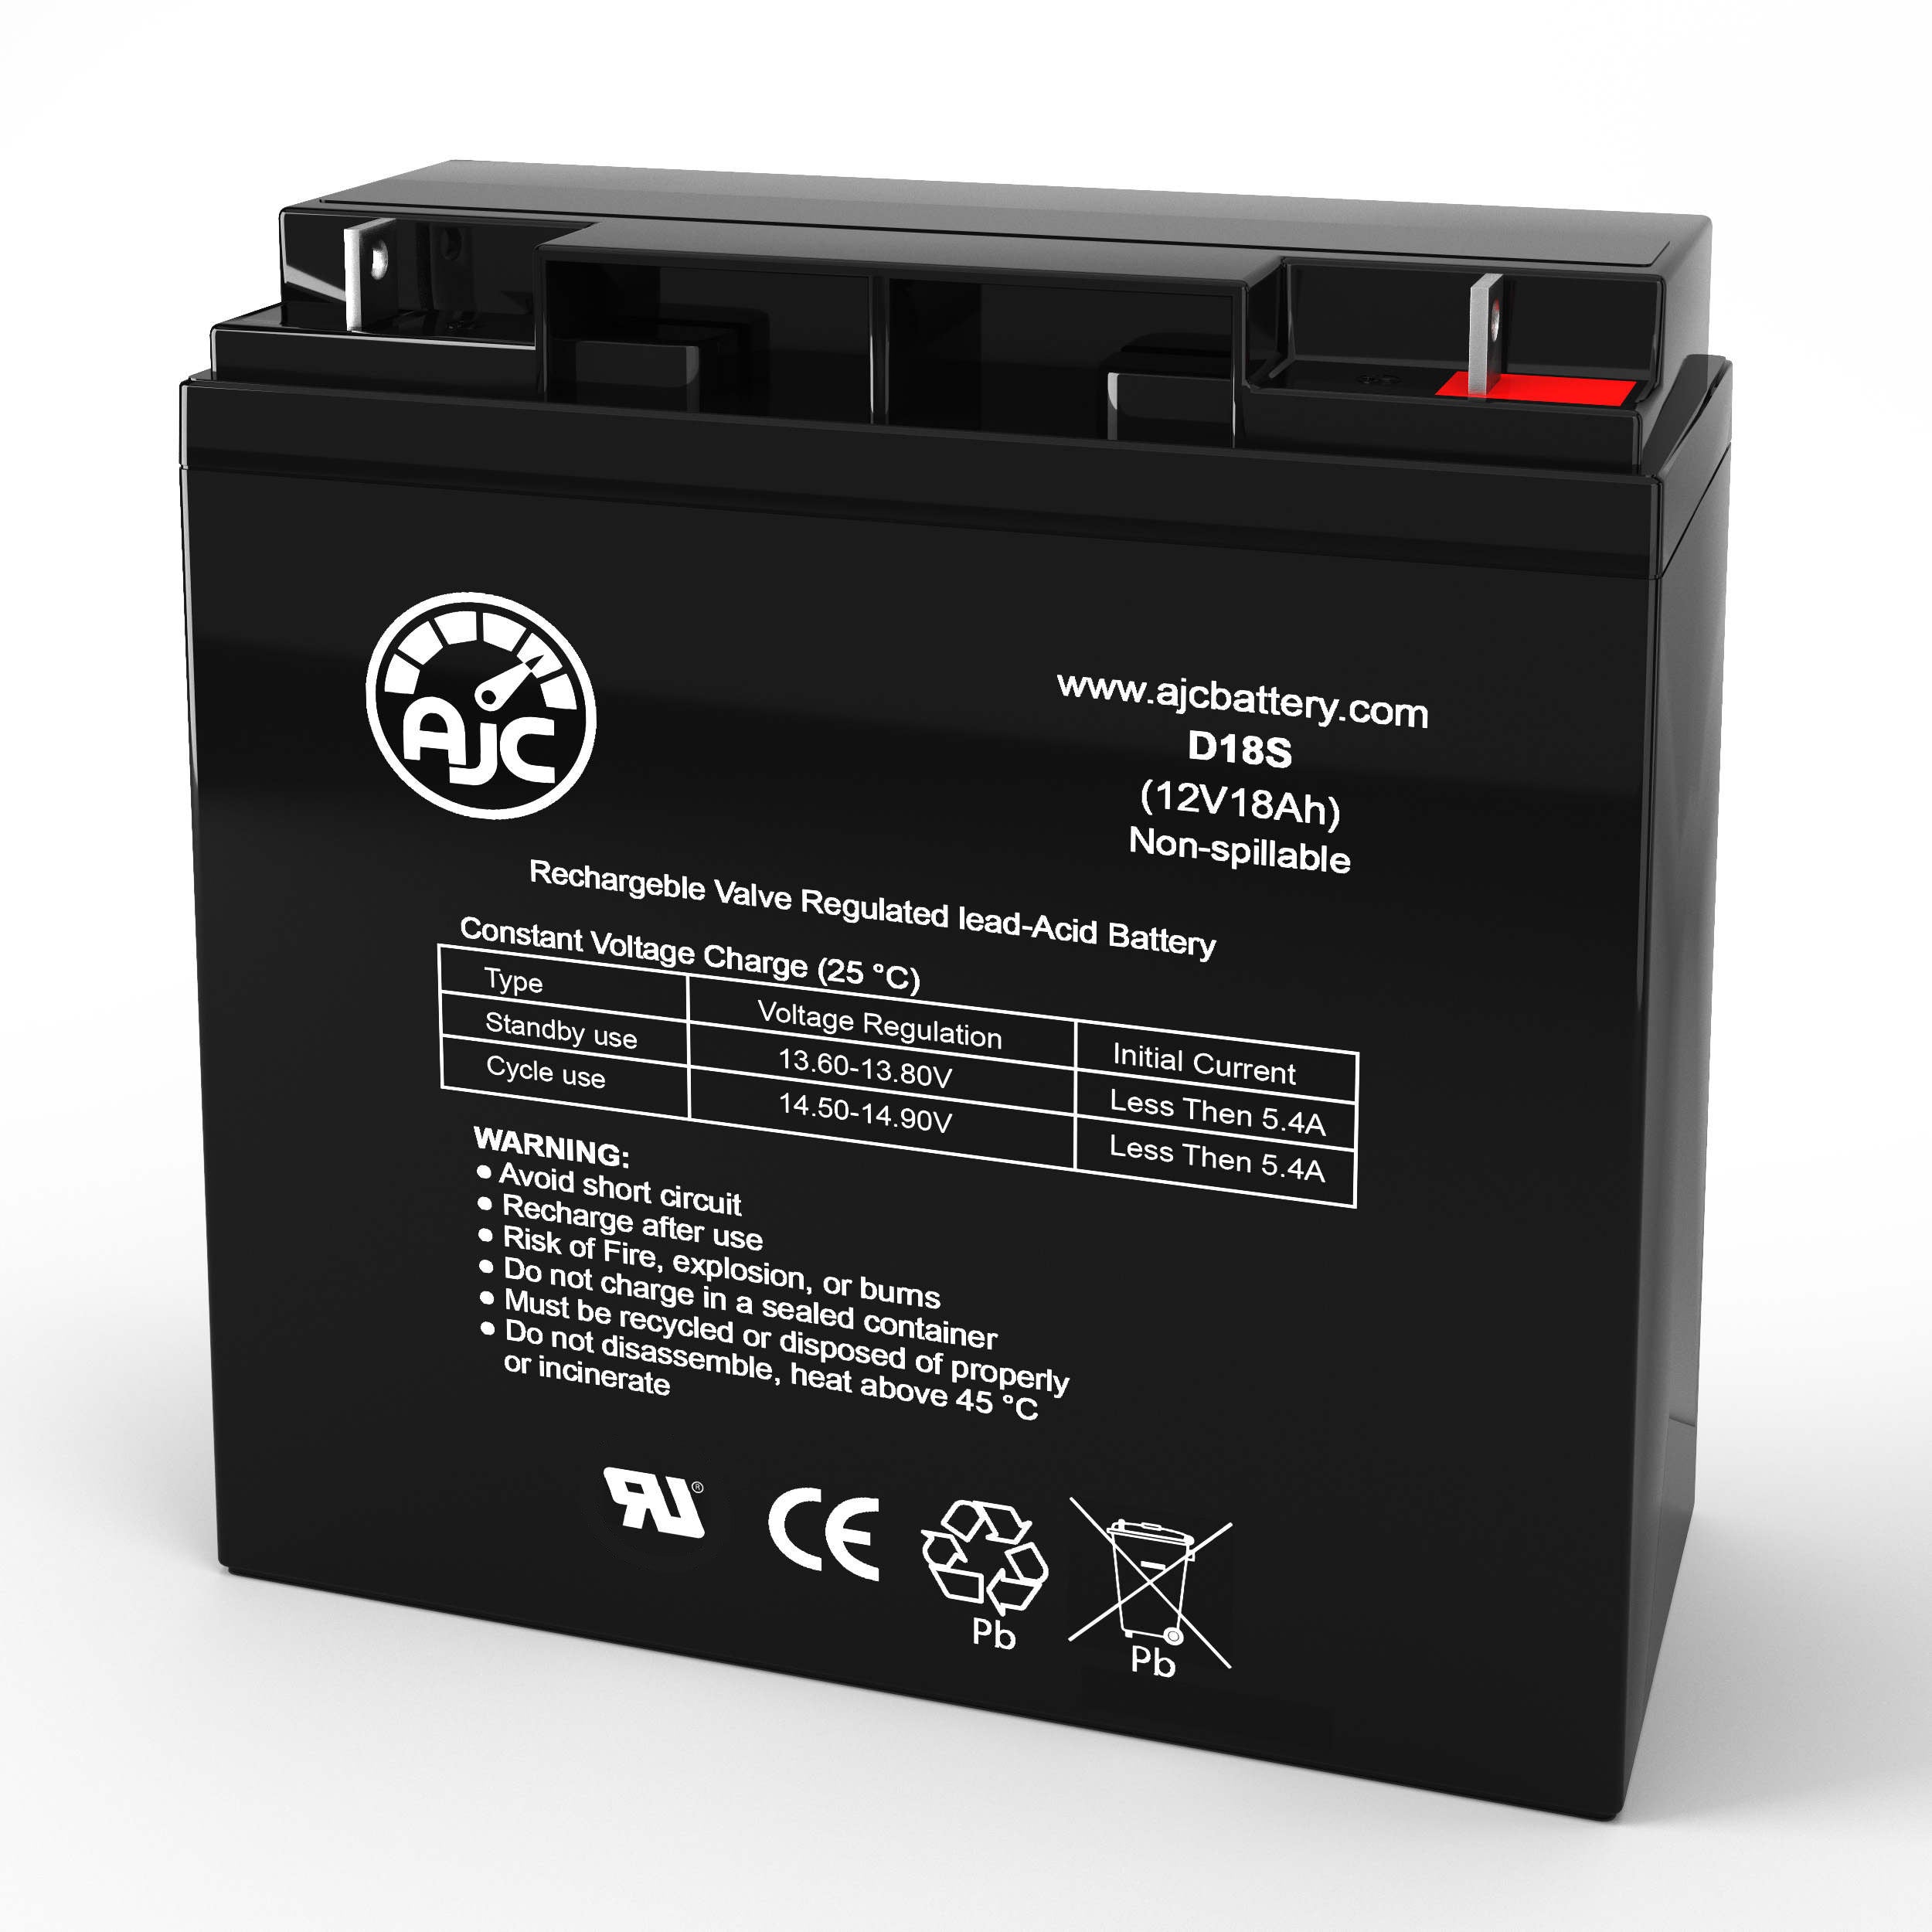 Jump N Carry JNC400 12V 18Ah Jump Starter Battery - This Is an AJC Brand Replacement - image 1 of 6